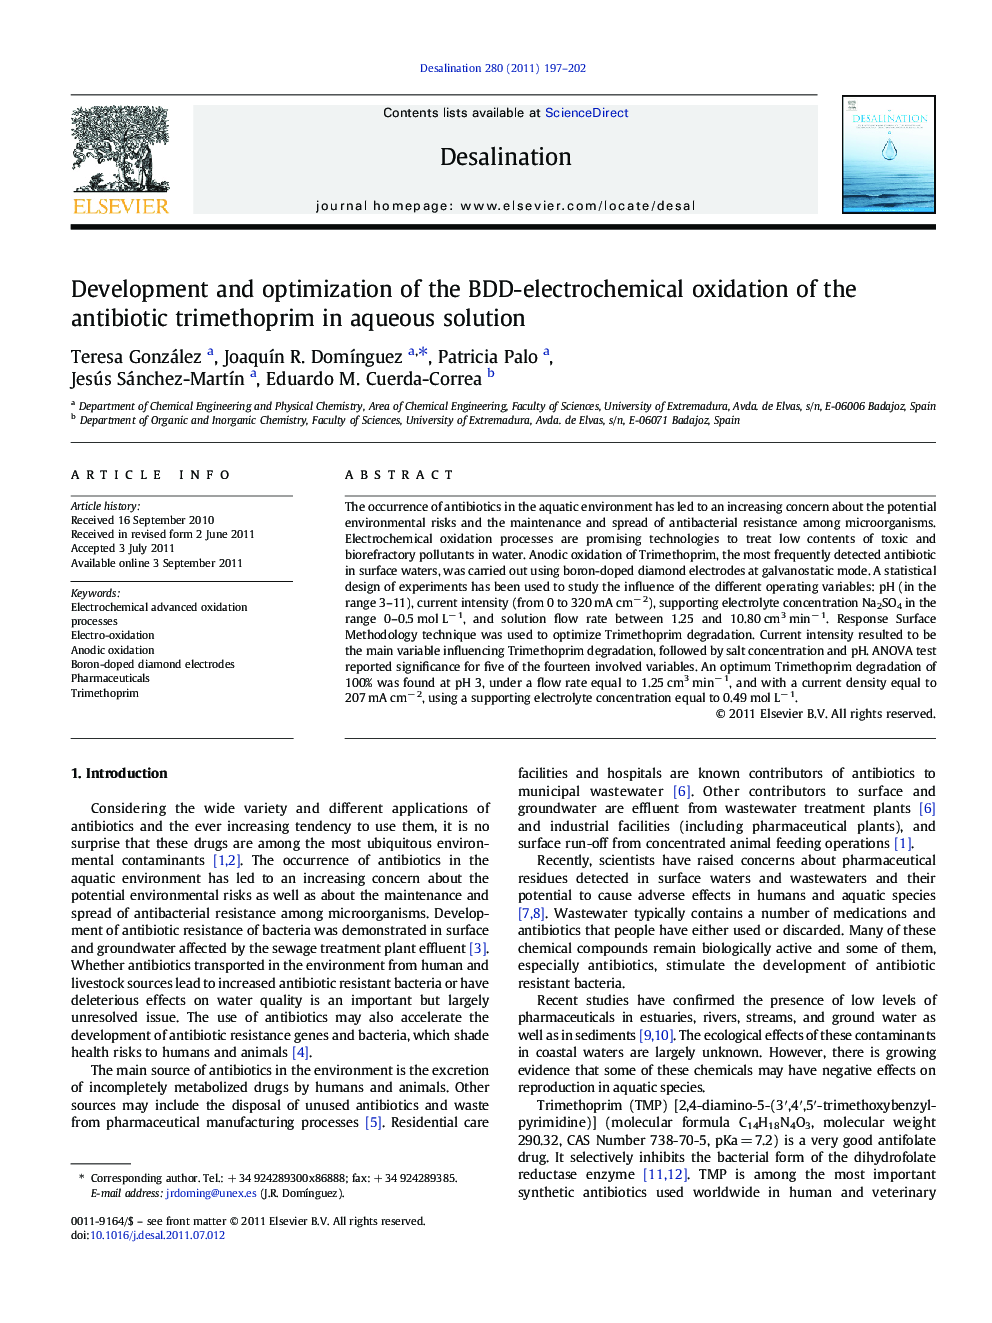 Development and optimization of the BDD-electrochemical oxidation of the antibiotic trimethoprim in aqueous solution